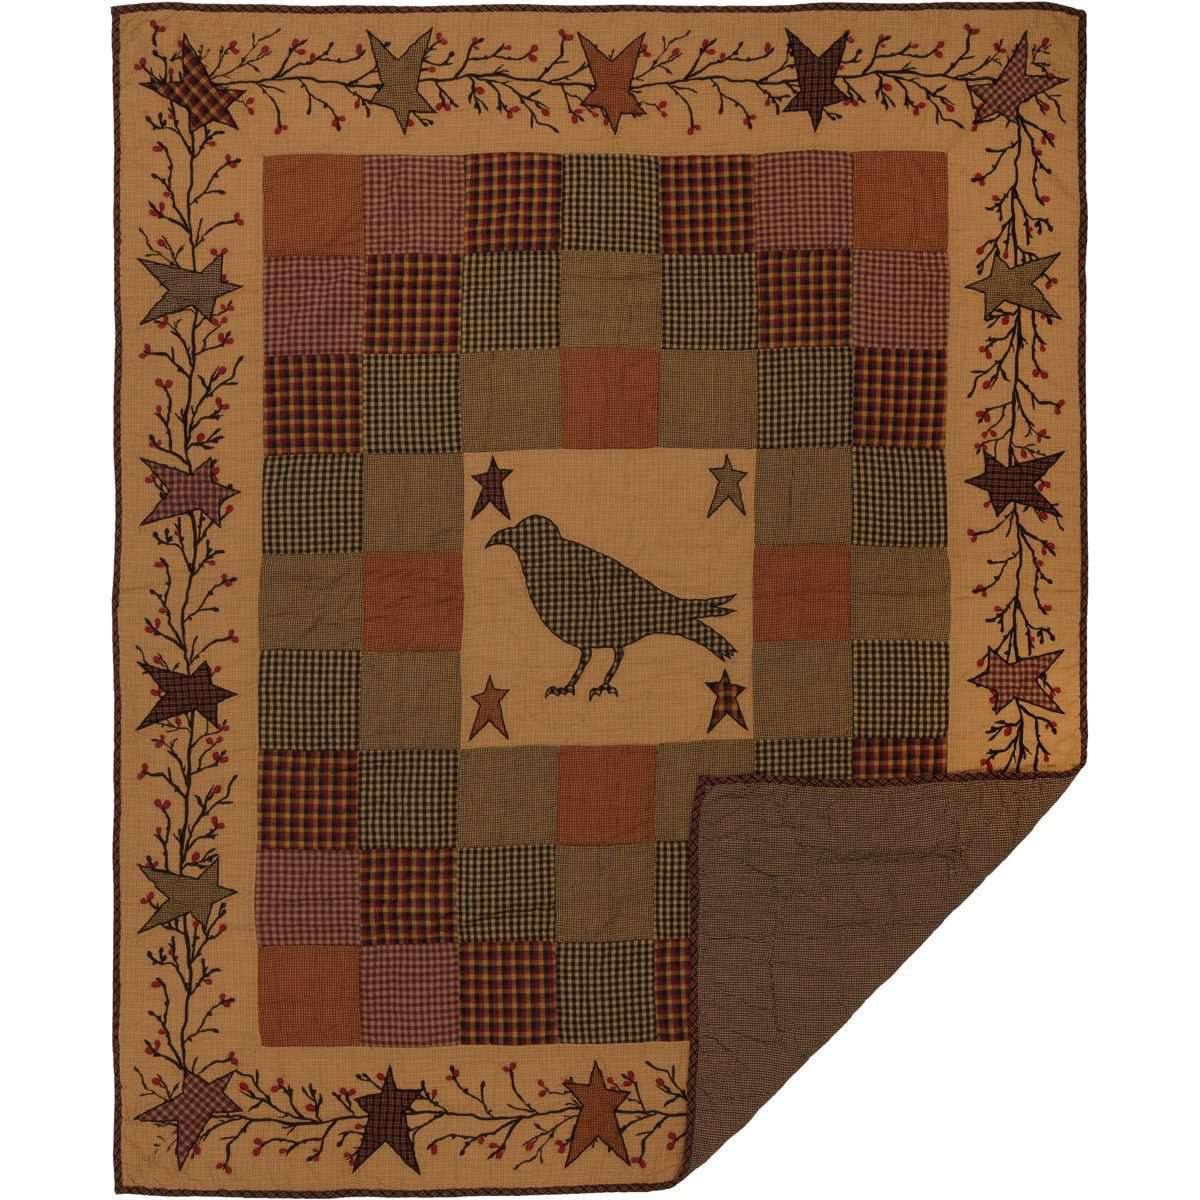 Heritage Farms Applique Crow and Star Quilted Throw 60x50 VHC Brands Online